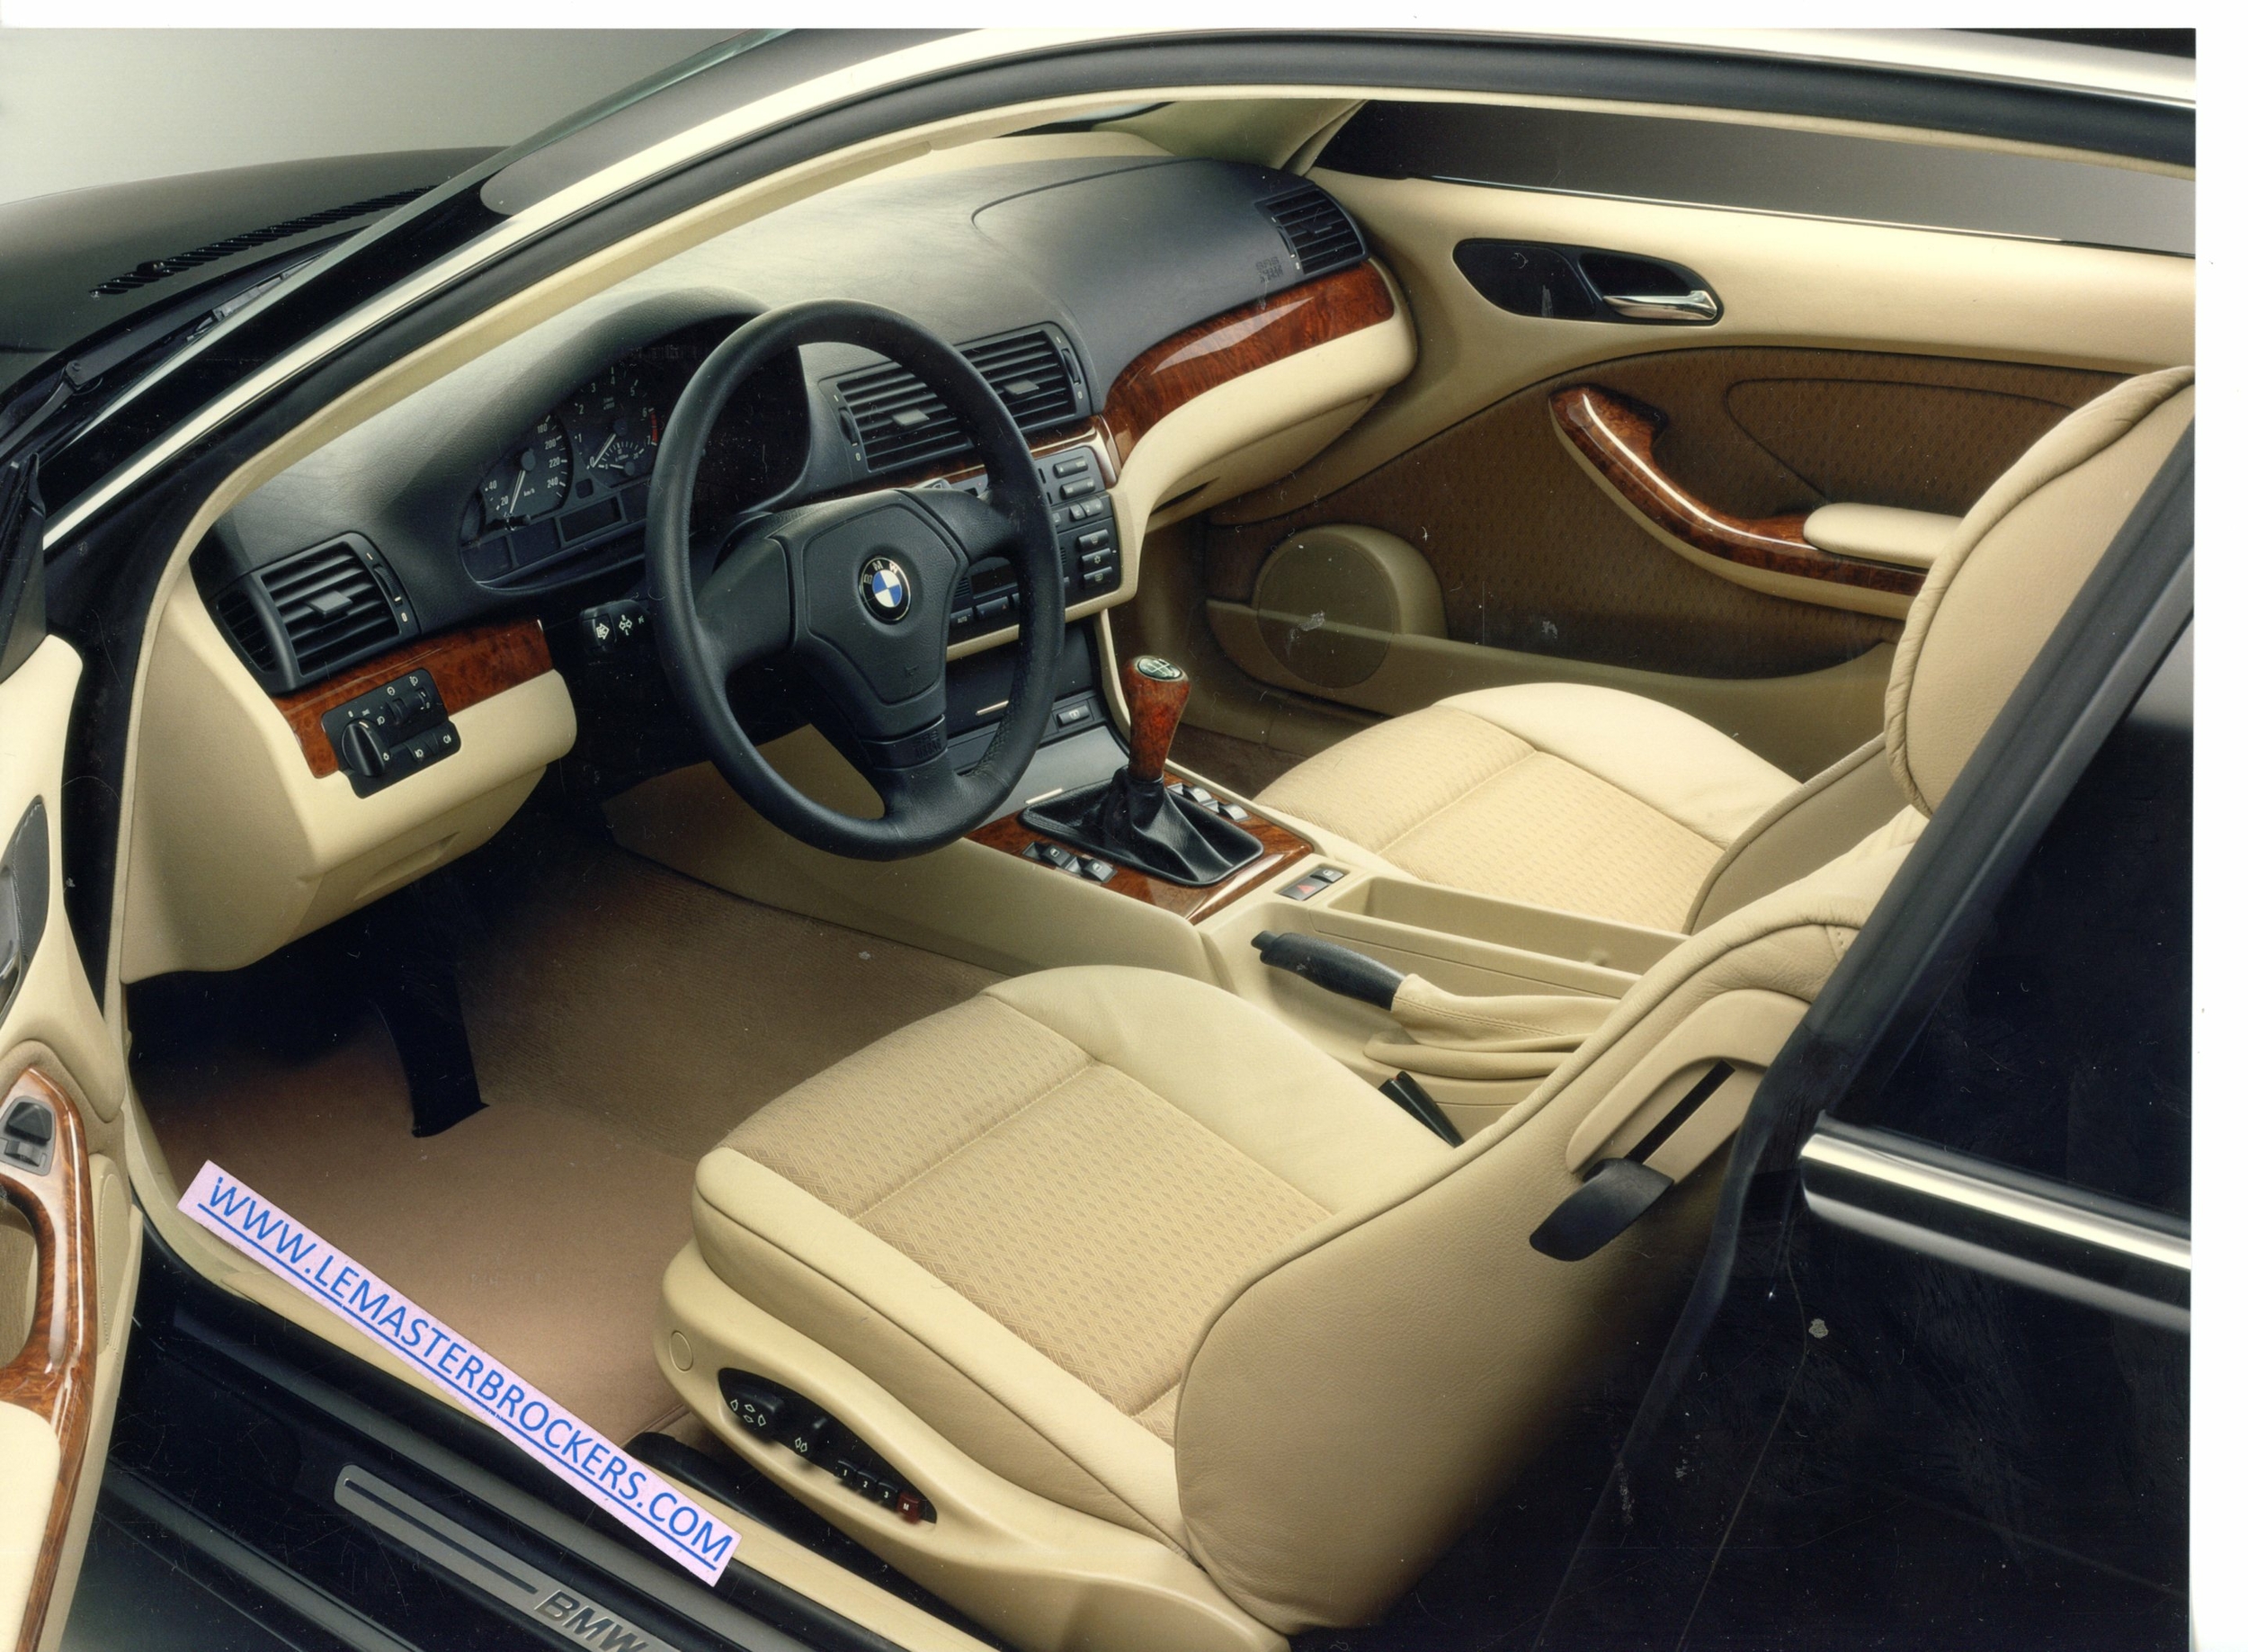 PHOTO BMW SERIE 3 COUPE INTERIEUR - PHOTOGRAPHIE BMW AG RE 98.3.2214